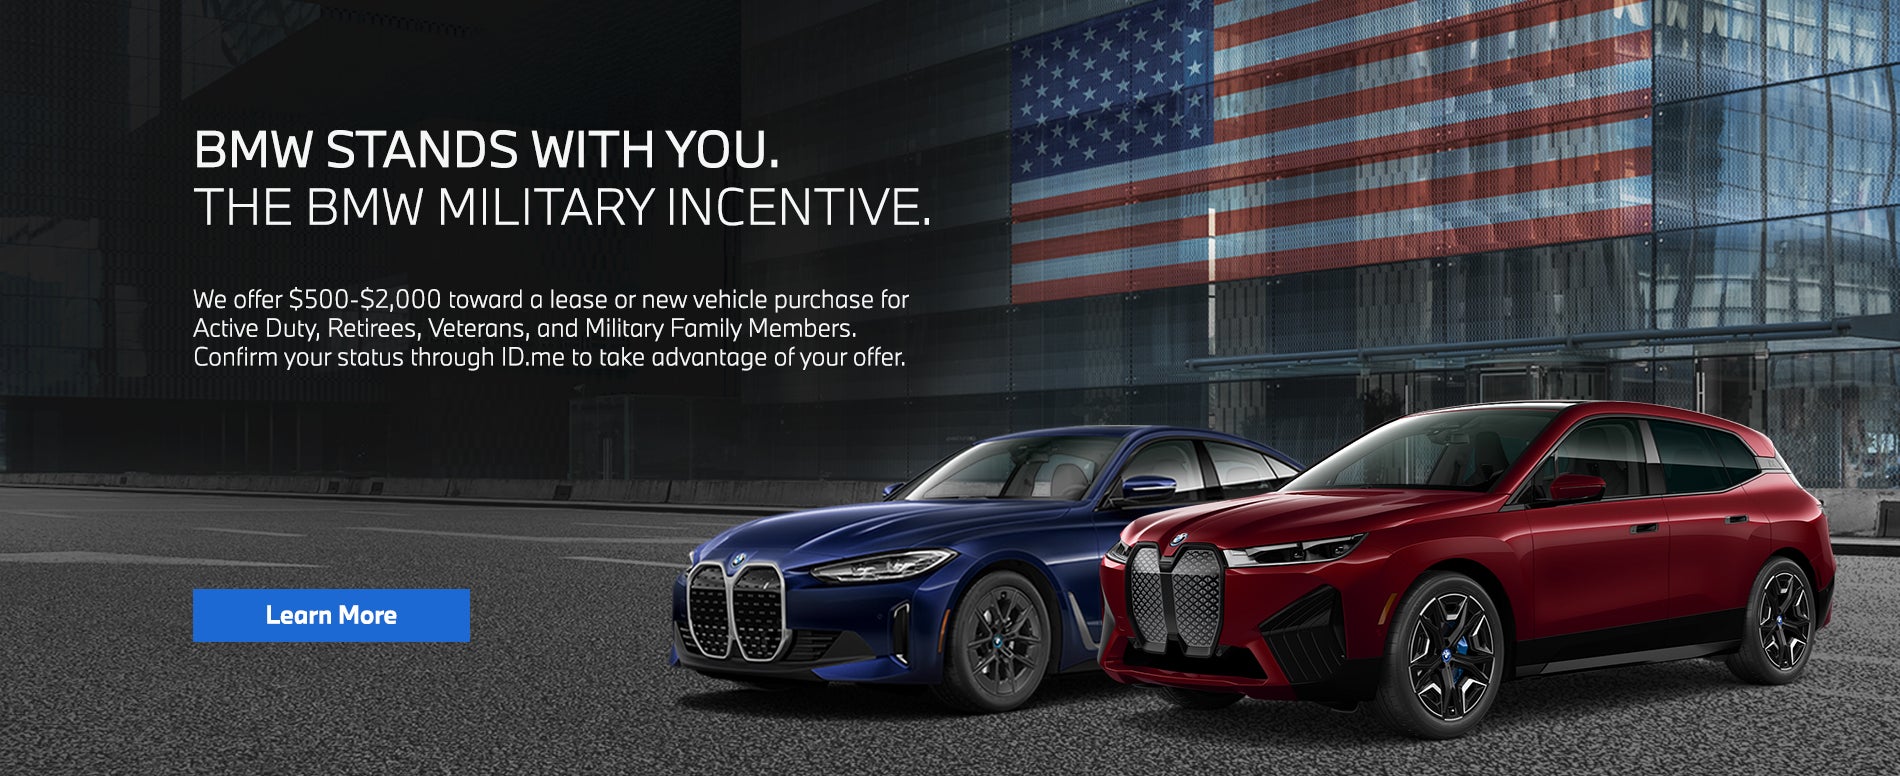 BMW Palm Springs Military Discount